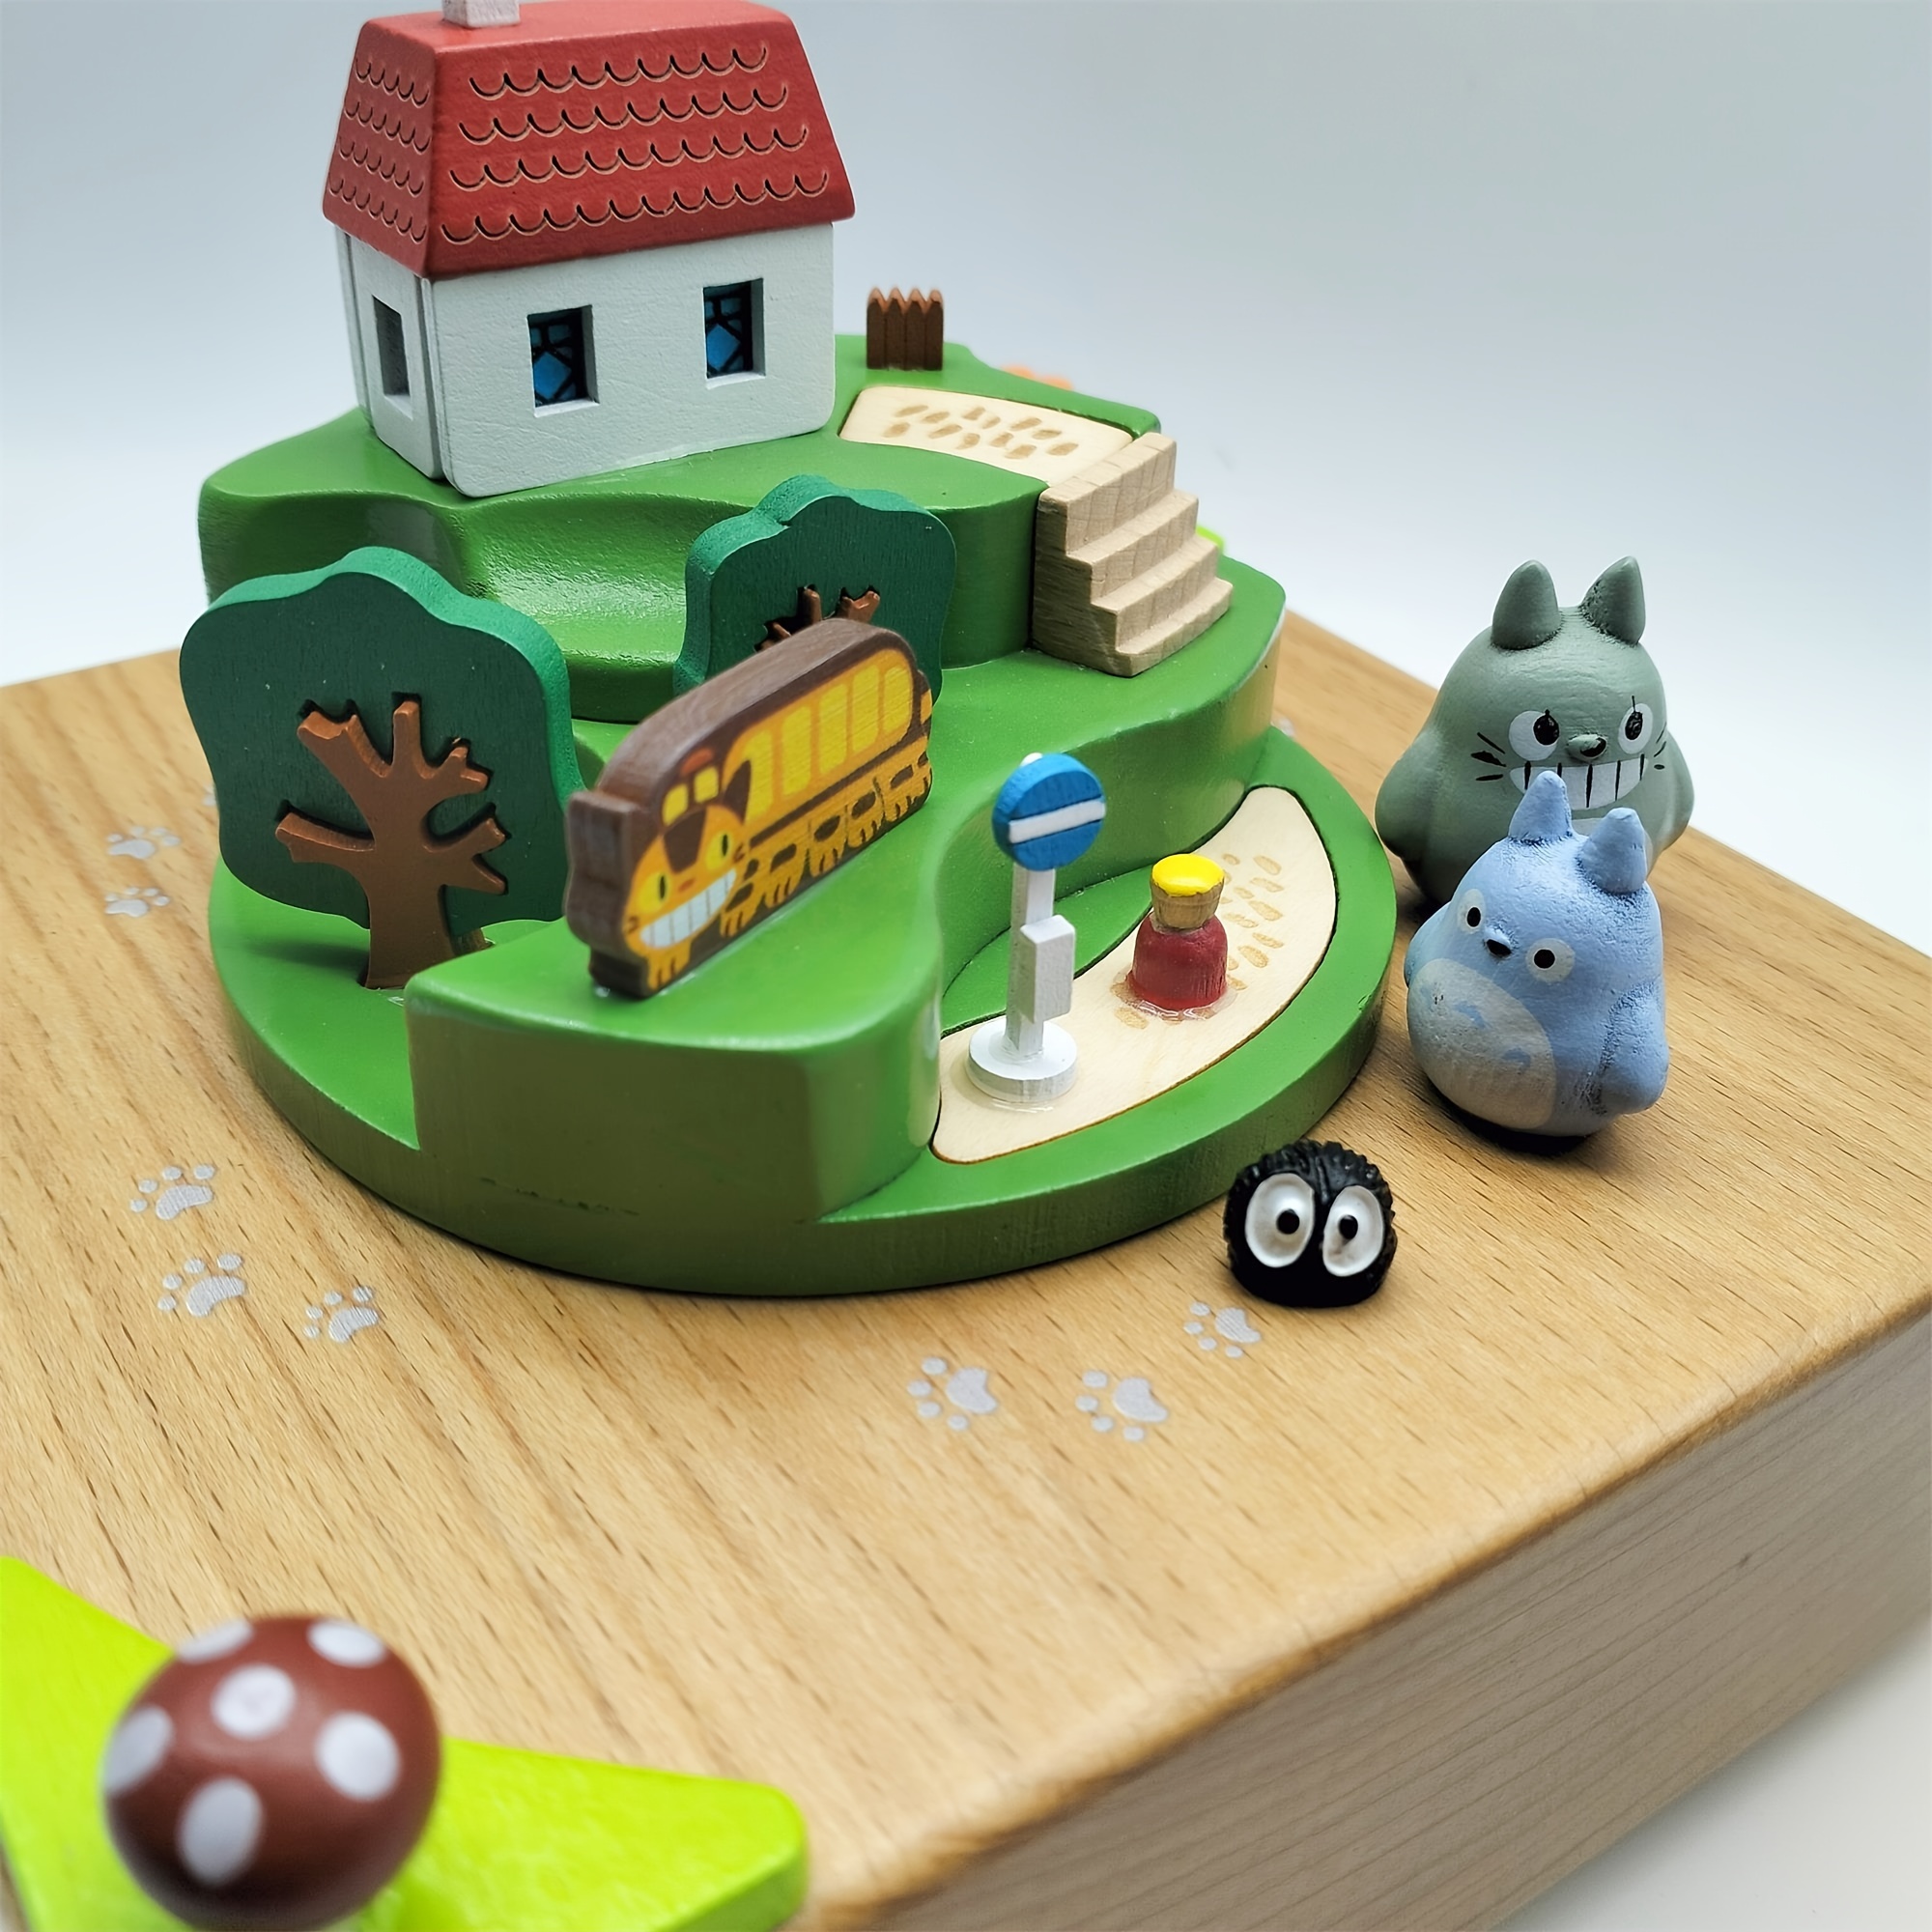 

Rustic Wooden Musical Box With Animal Figurines - Handcrafted Wind-up Mechanism, No Battery Required - Charming Room Decor And Creative Gift For Family, Friends, And Loved Ones